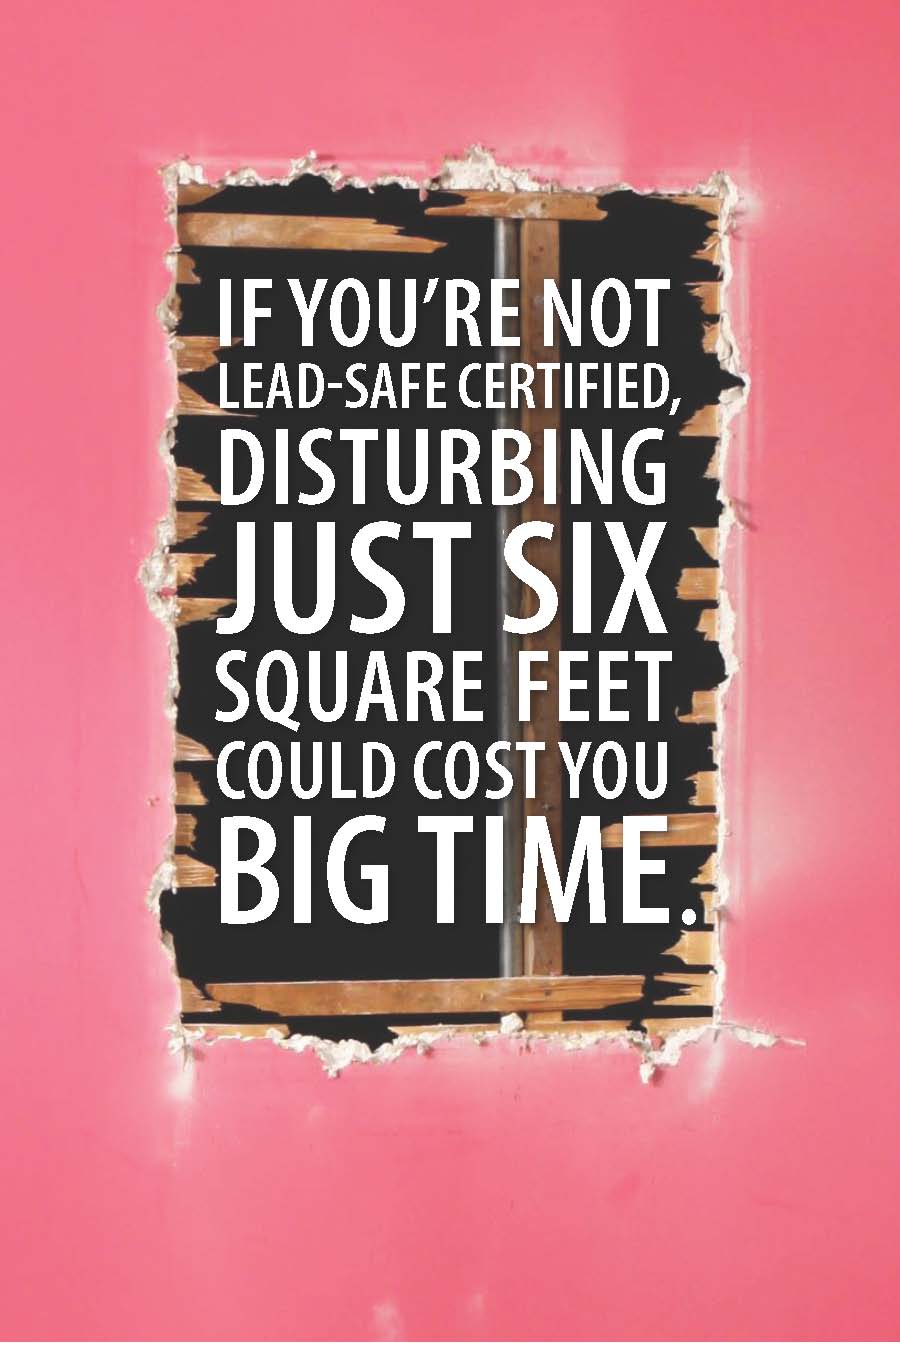  if you're not lead-safe certified disturbing just six square fee could cost you <em>big time</em>.